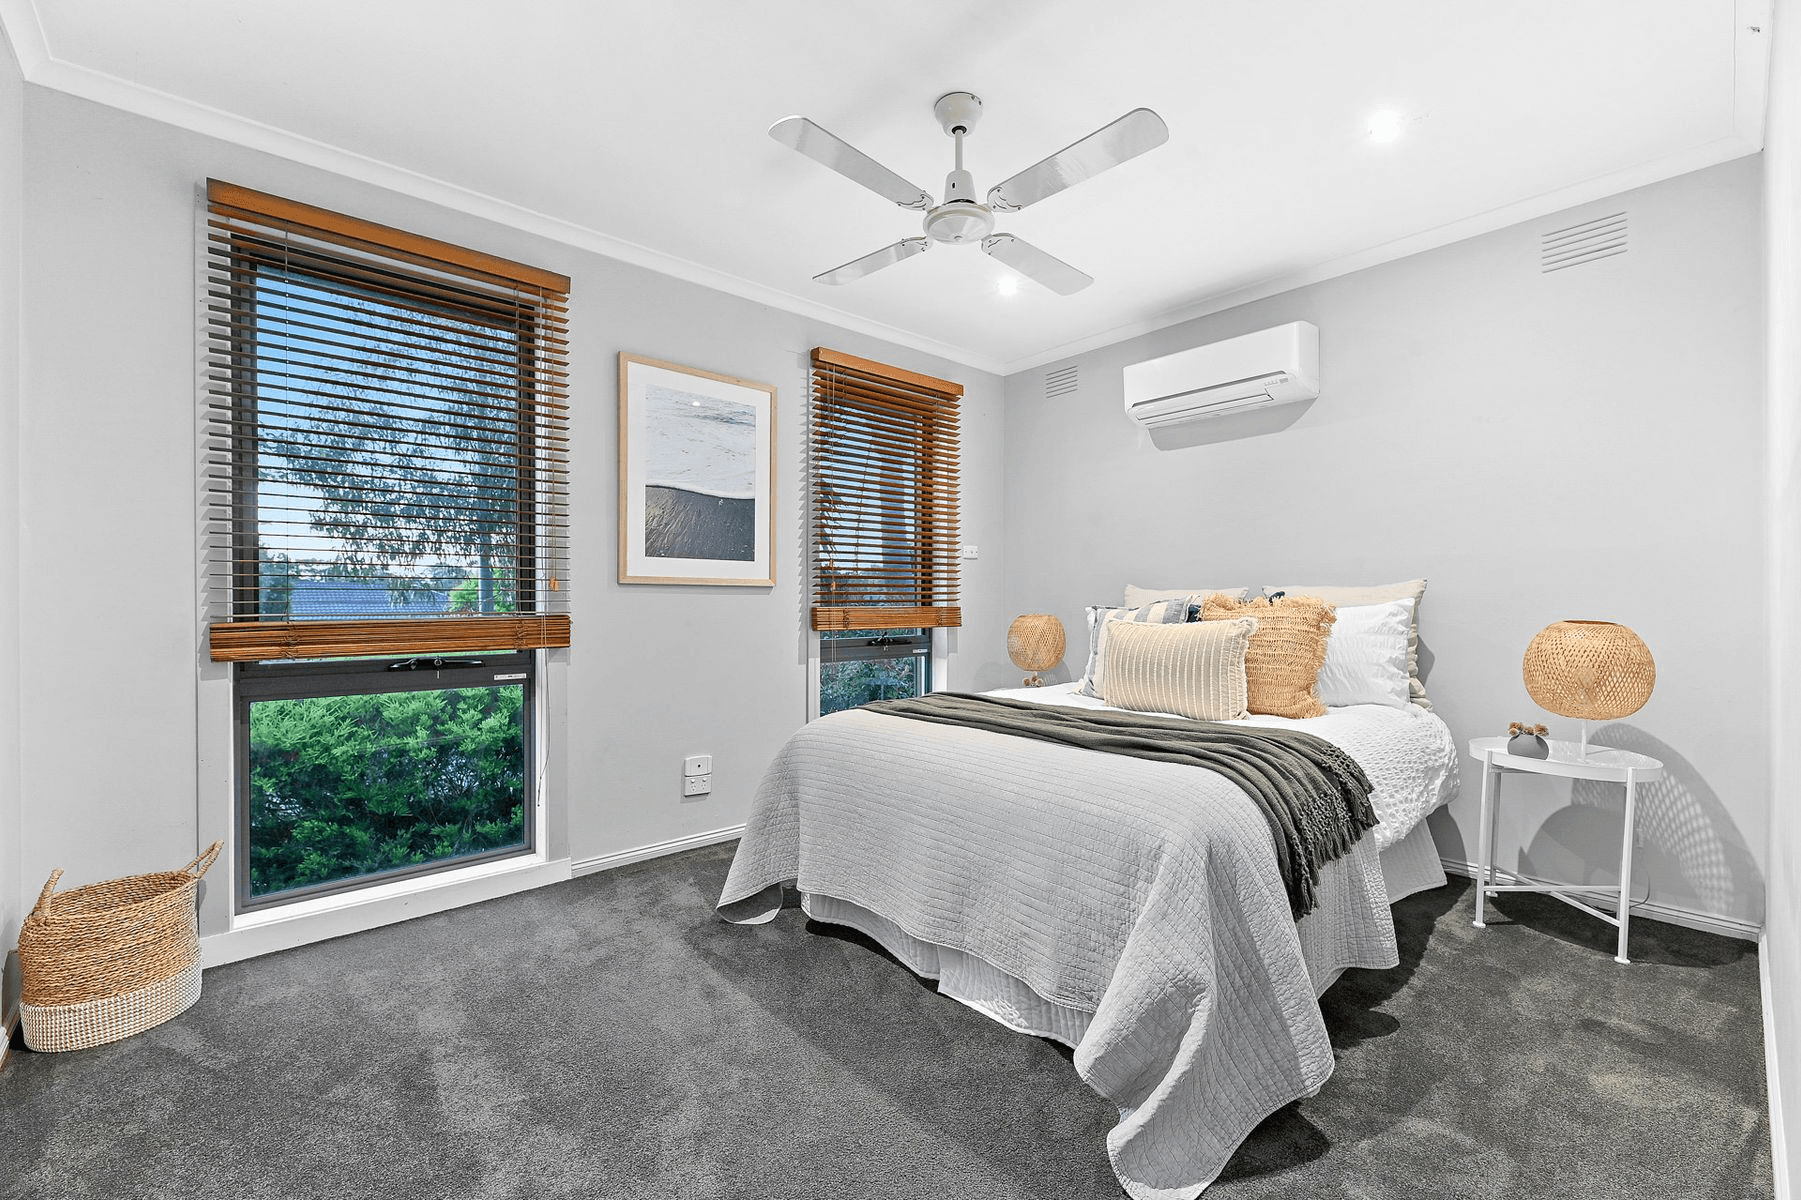 1 Isaac Smith Crescent, ENDEAVOUR HILLS, VIC 3802